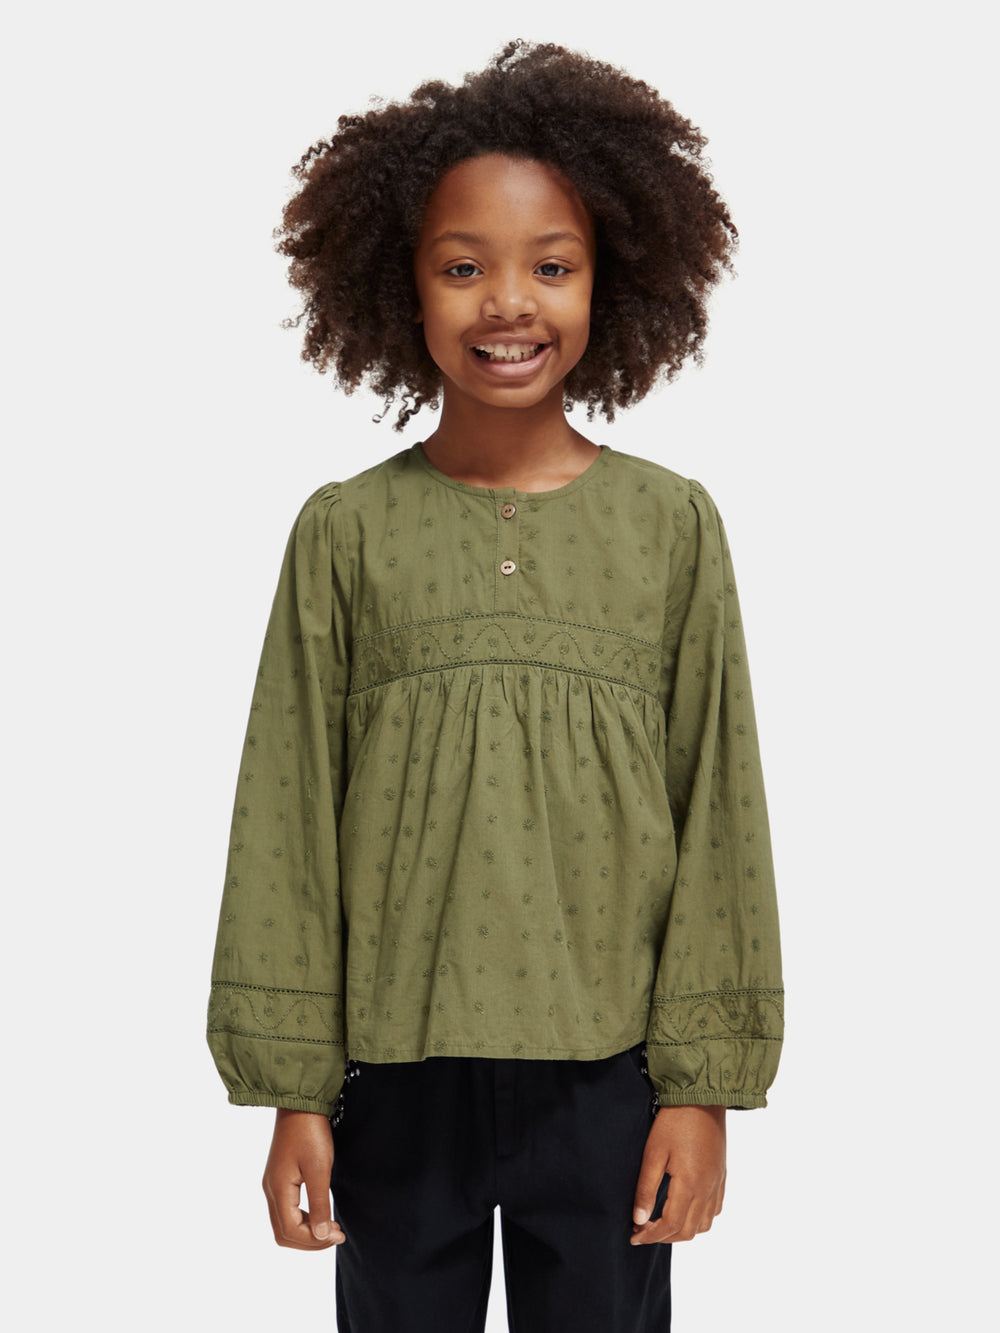 Kids - Broderie anglaise panelled top - Scotch & Soda NZ